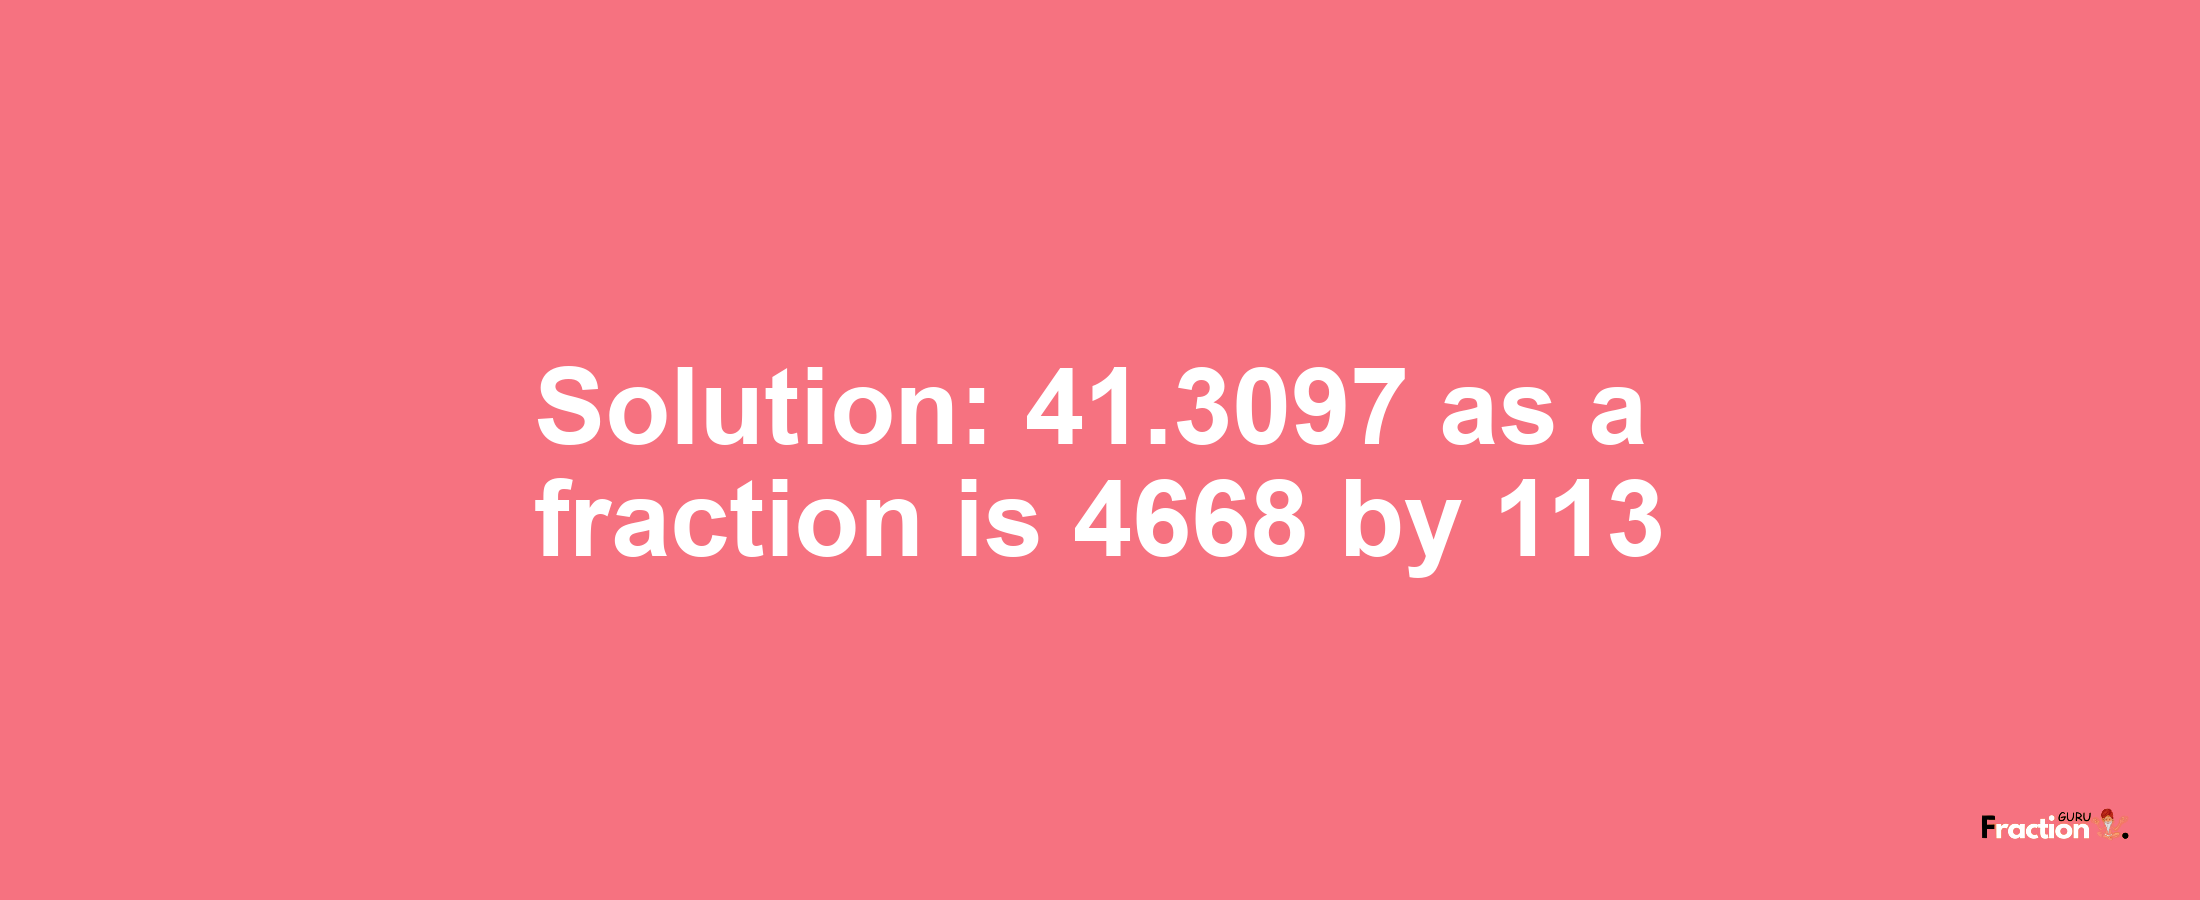 Solution:41.3097 as a fraction is 4668/113